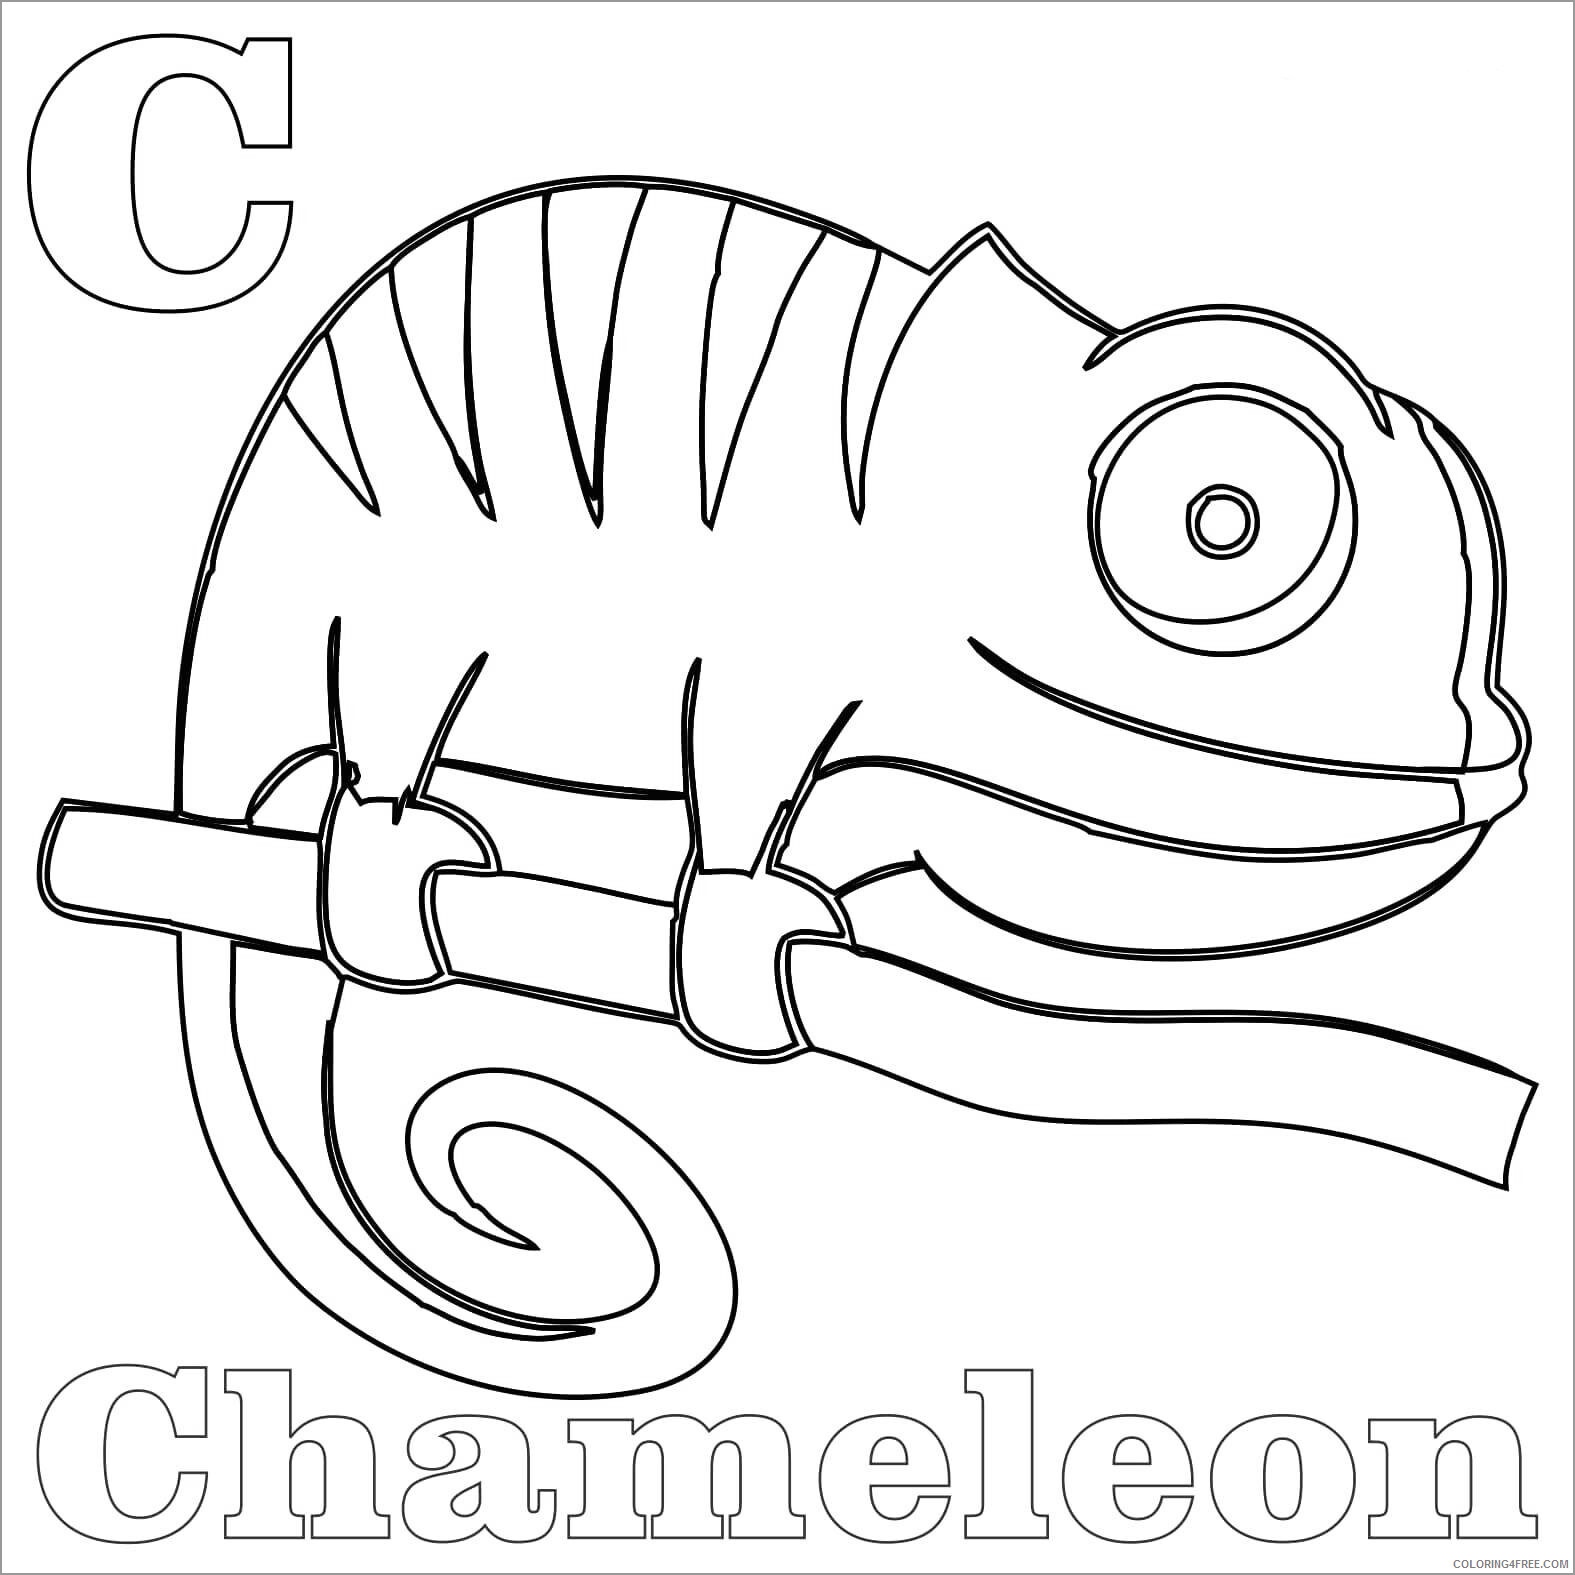 Chameleon Coloring Pages Animal Printable Sheets C for Chameleon 2021 0956 Coloring4free